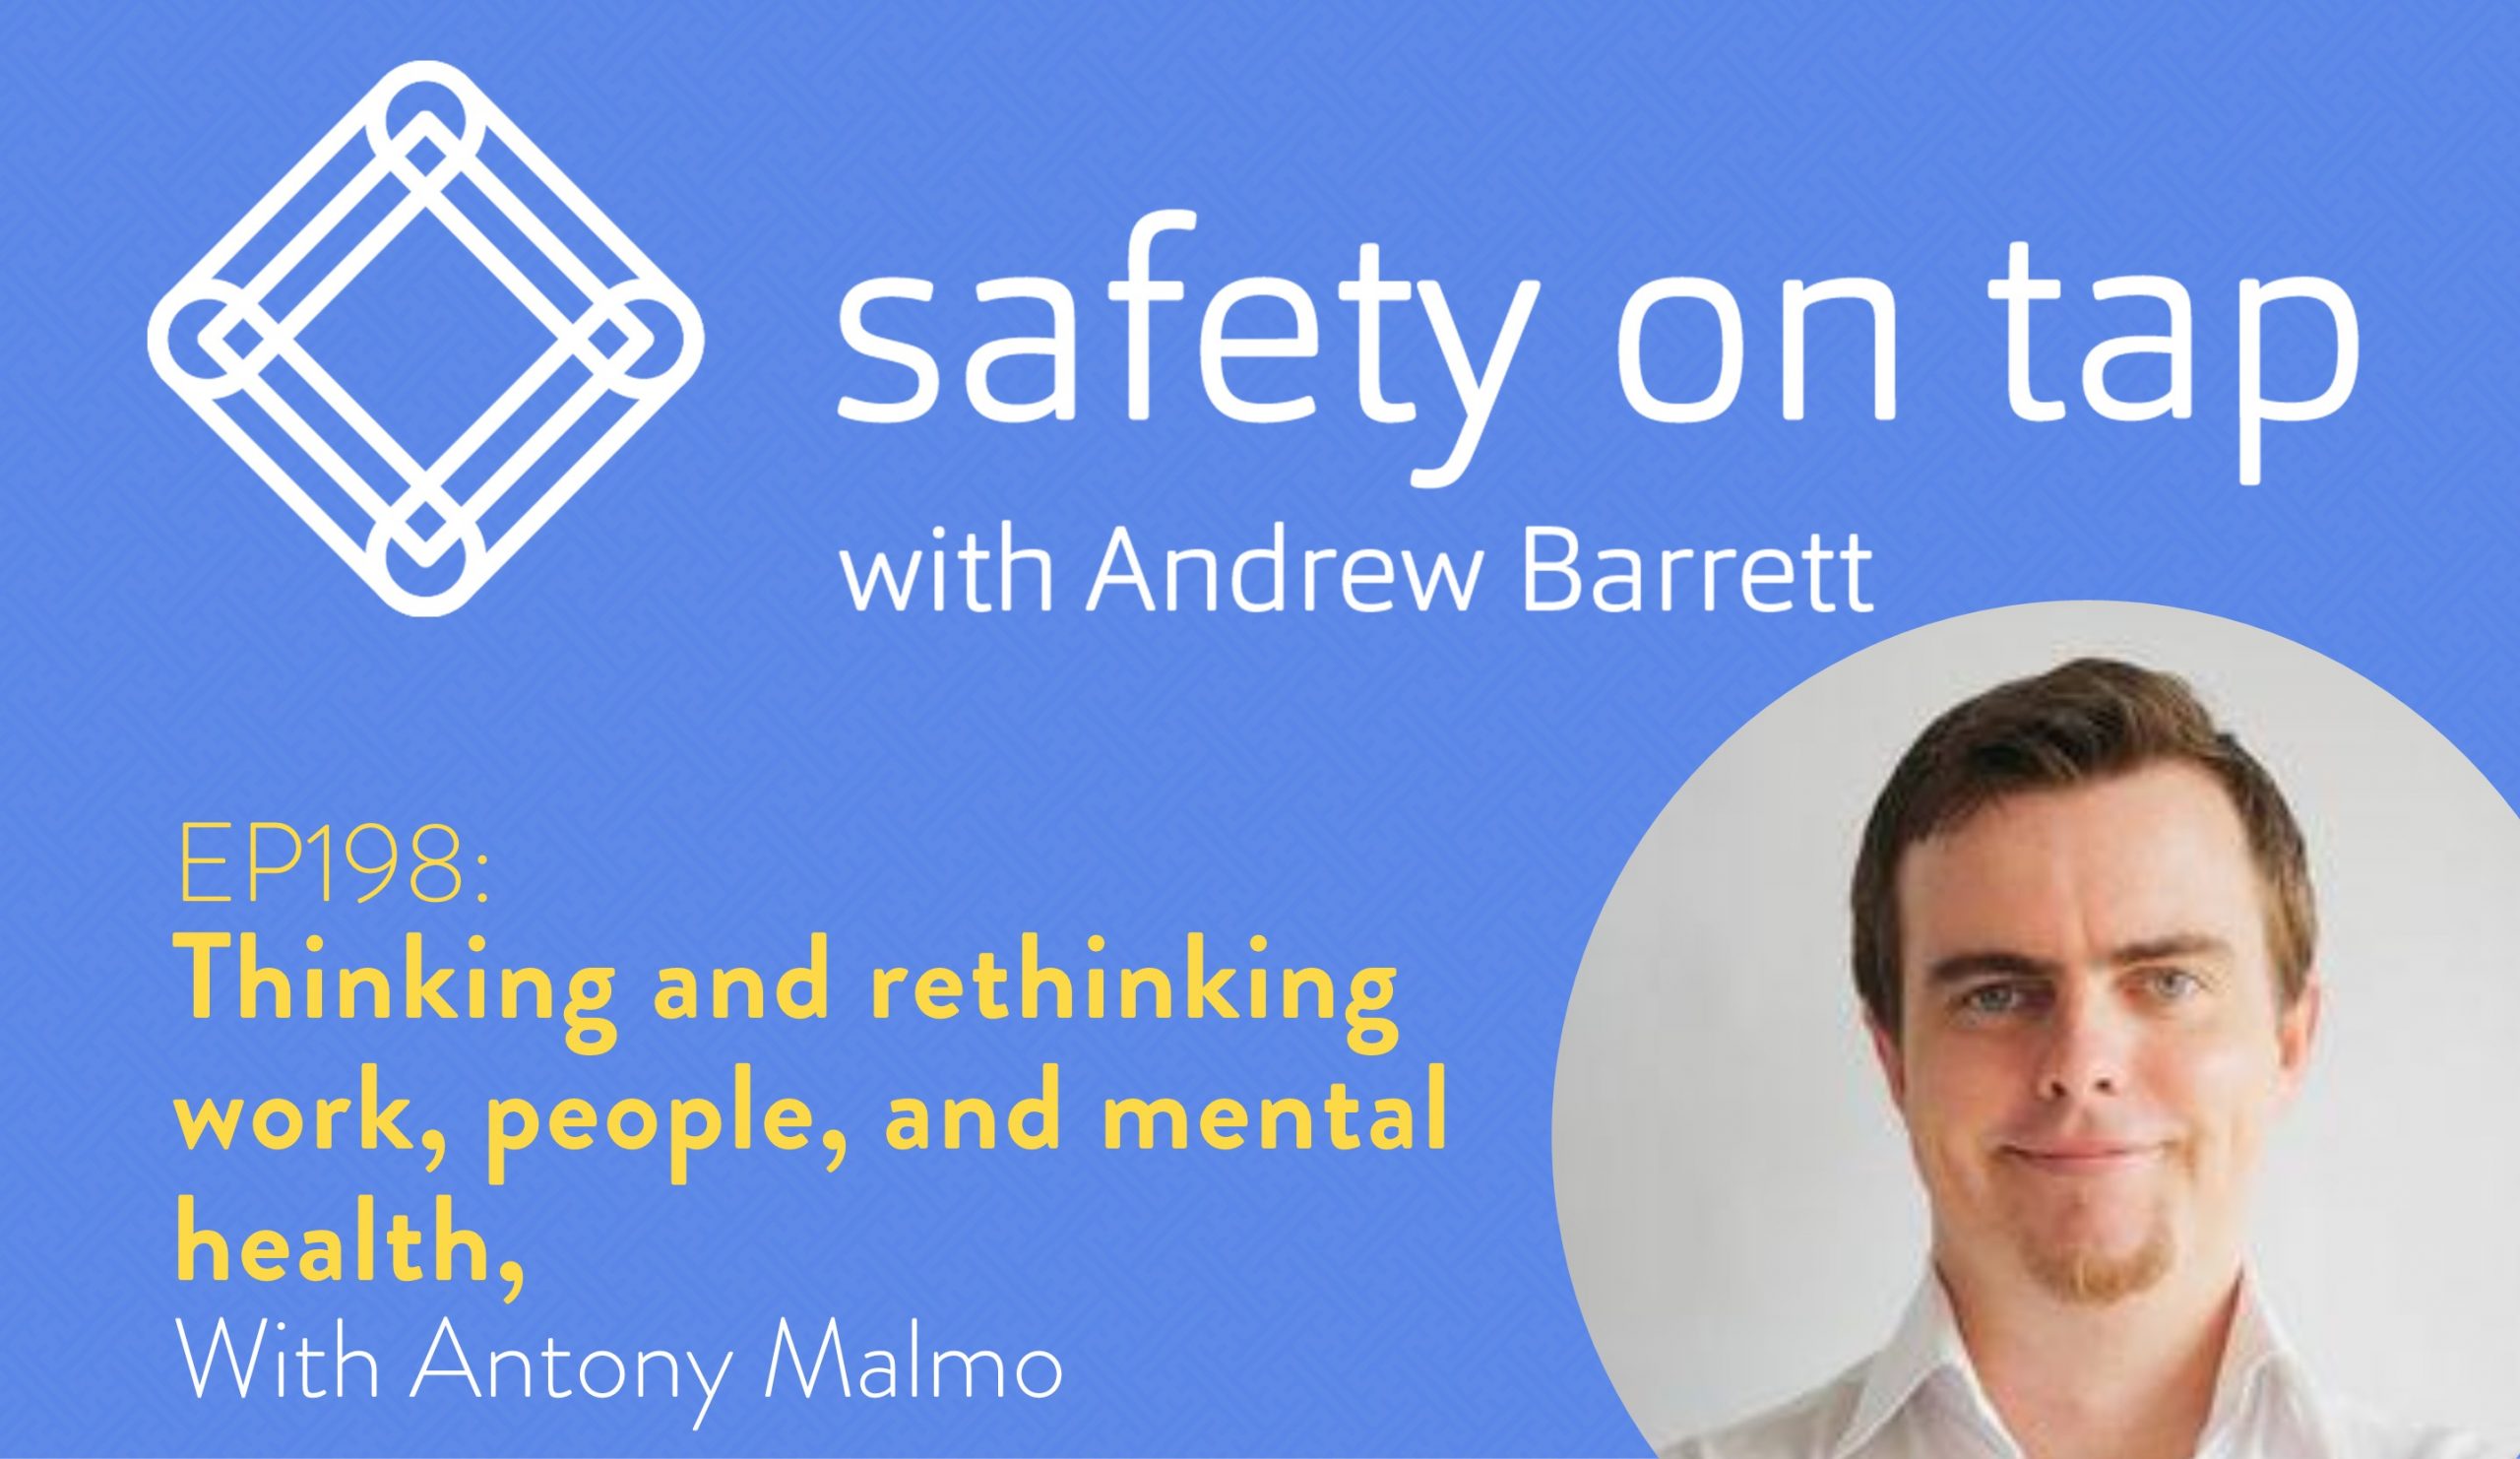 Ep198: Thinking and rethinking work, people, and mental health, with Antony Malmo